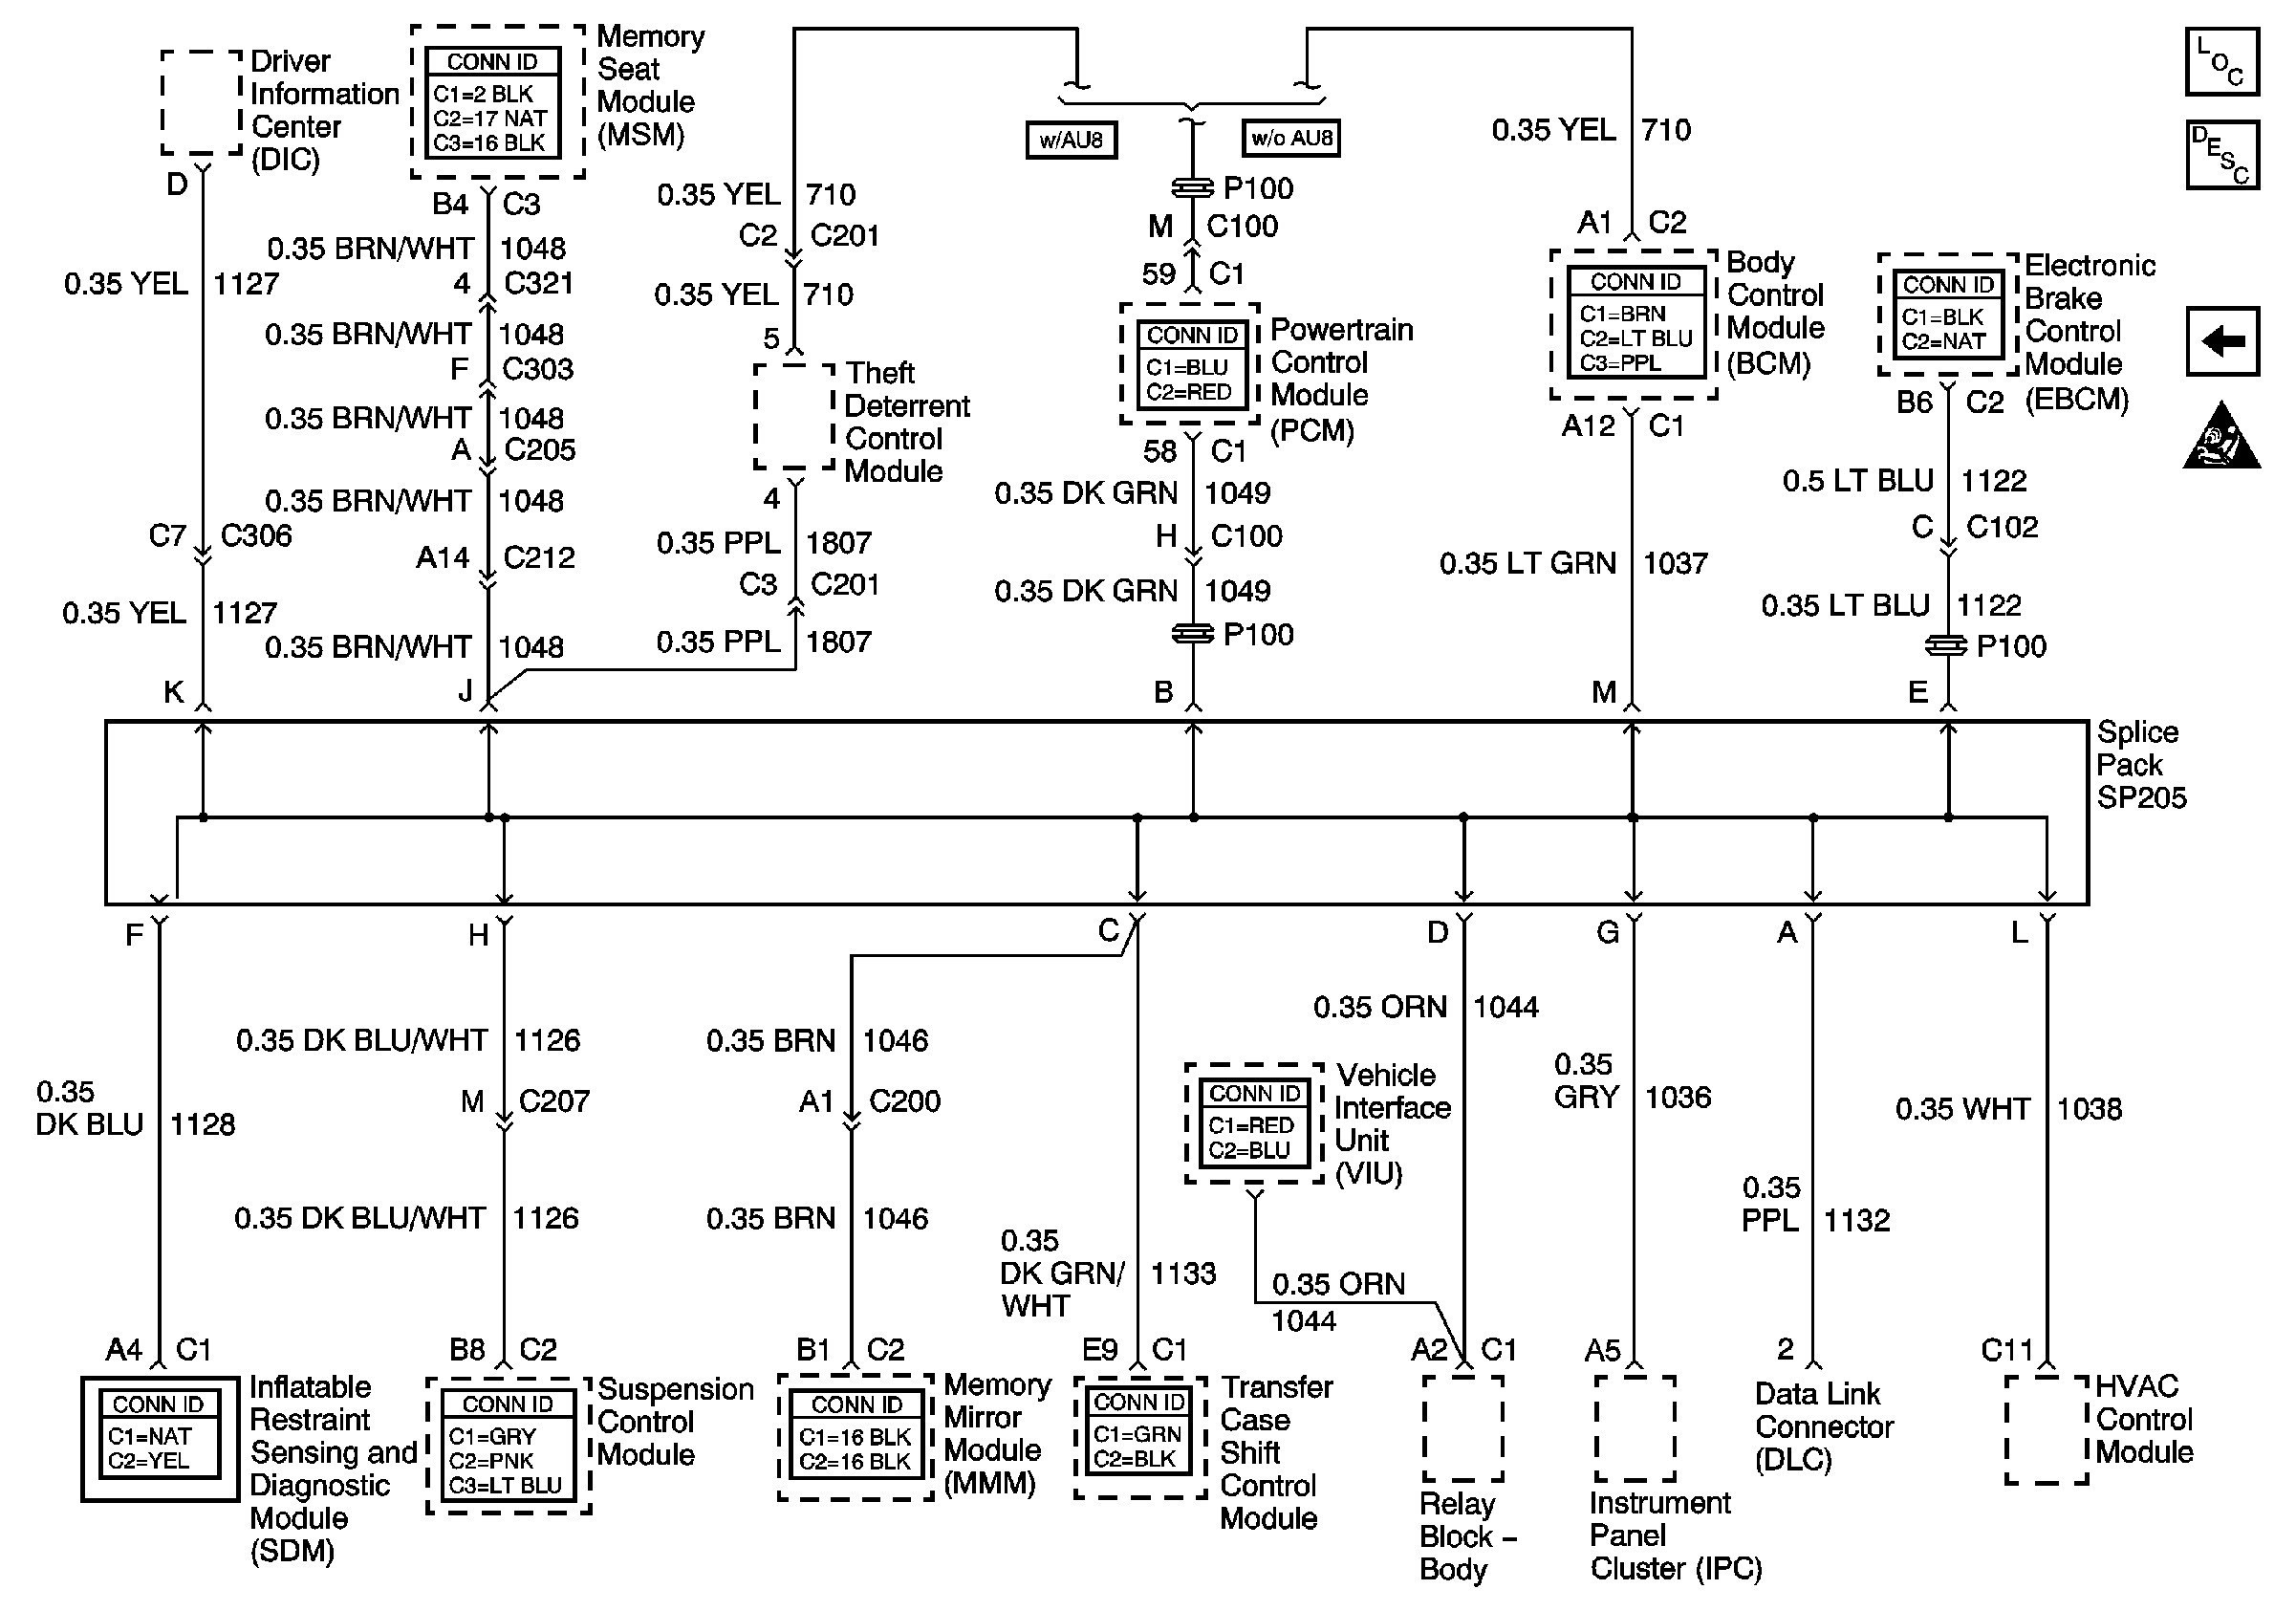 2002 Chevy Avalanche Parts Diagram 02 Avalanche Fuse Box Of 2002 Chevy Avalanche Parts Diagram